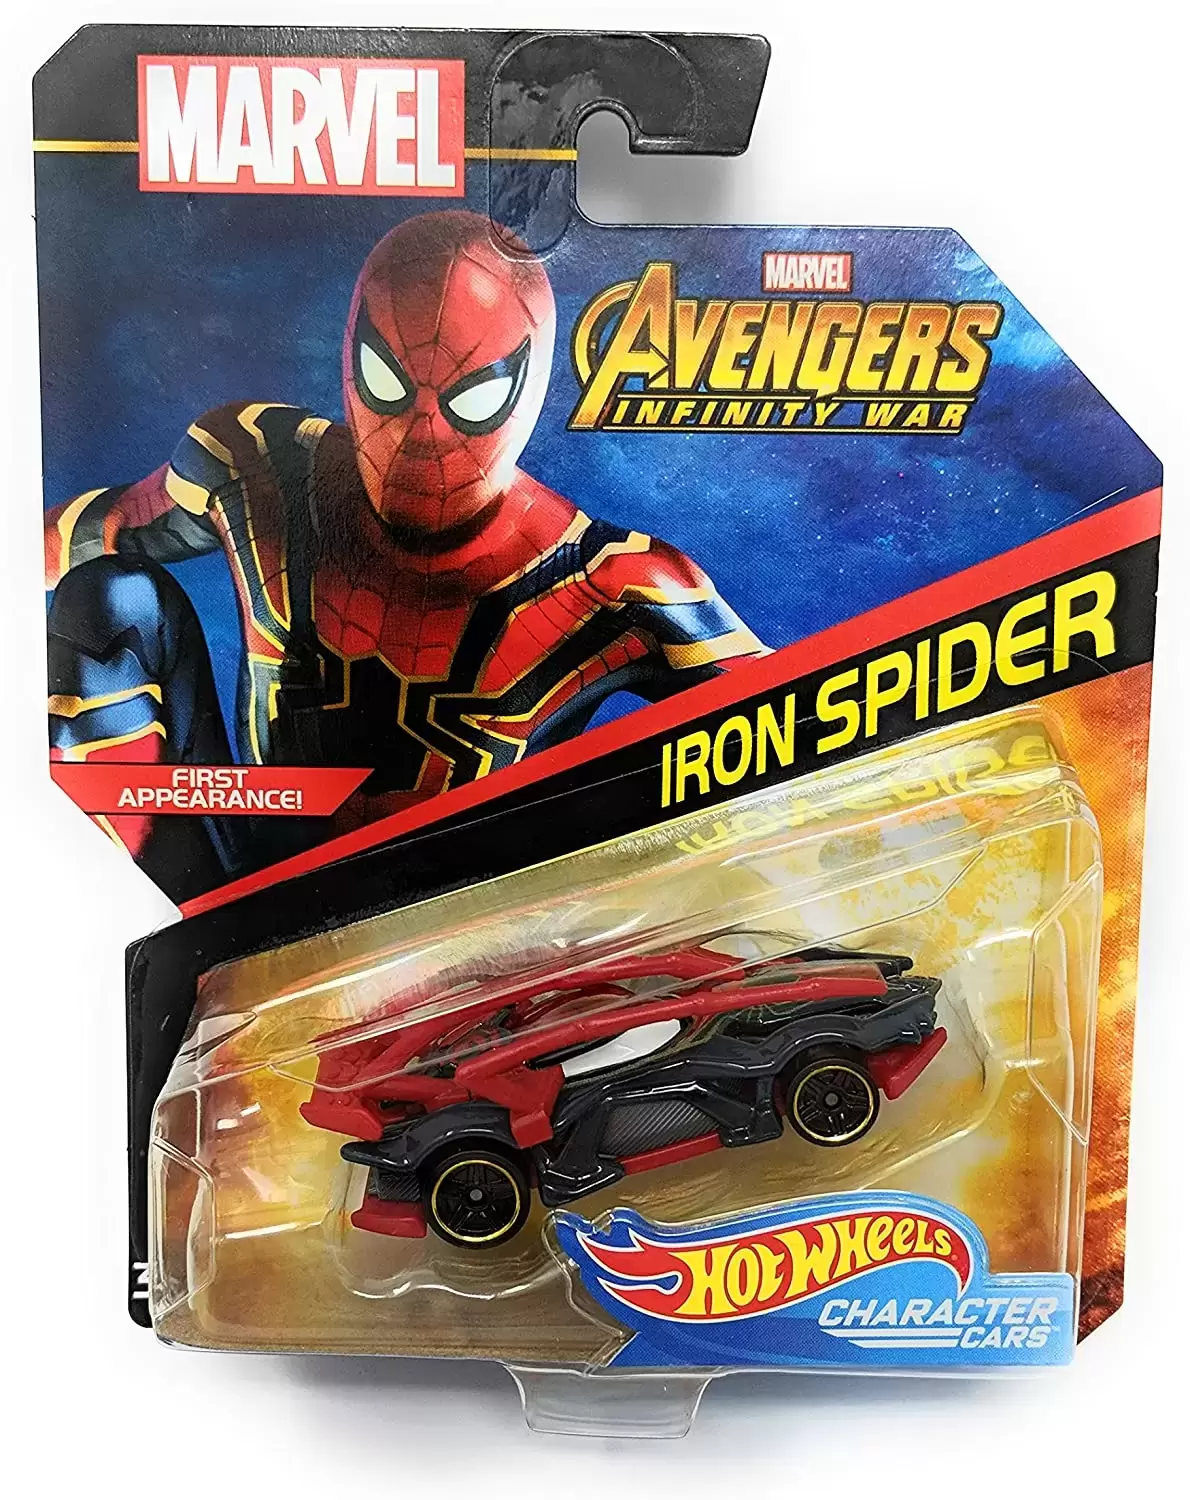 Marvel Character Cars - Avengers Infinity Wars - Iron Spider